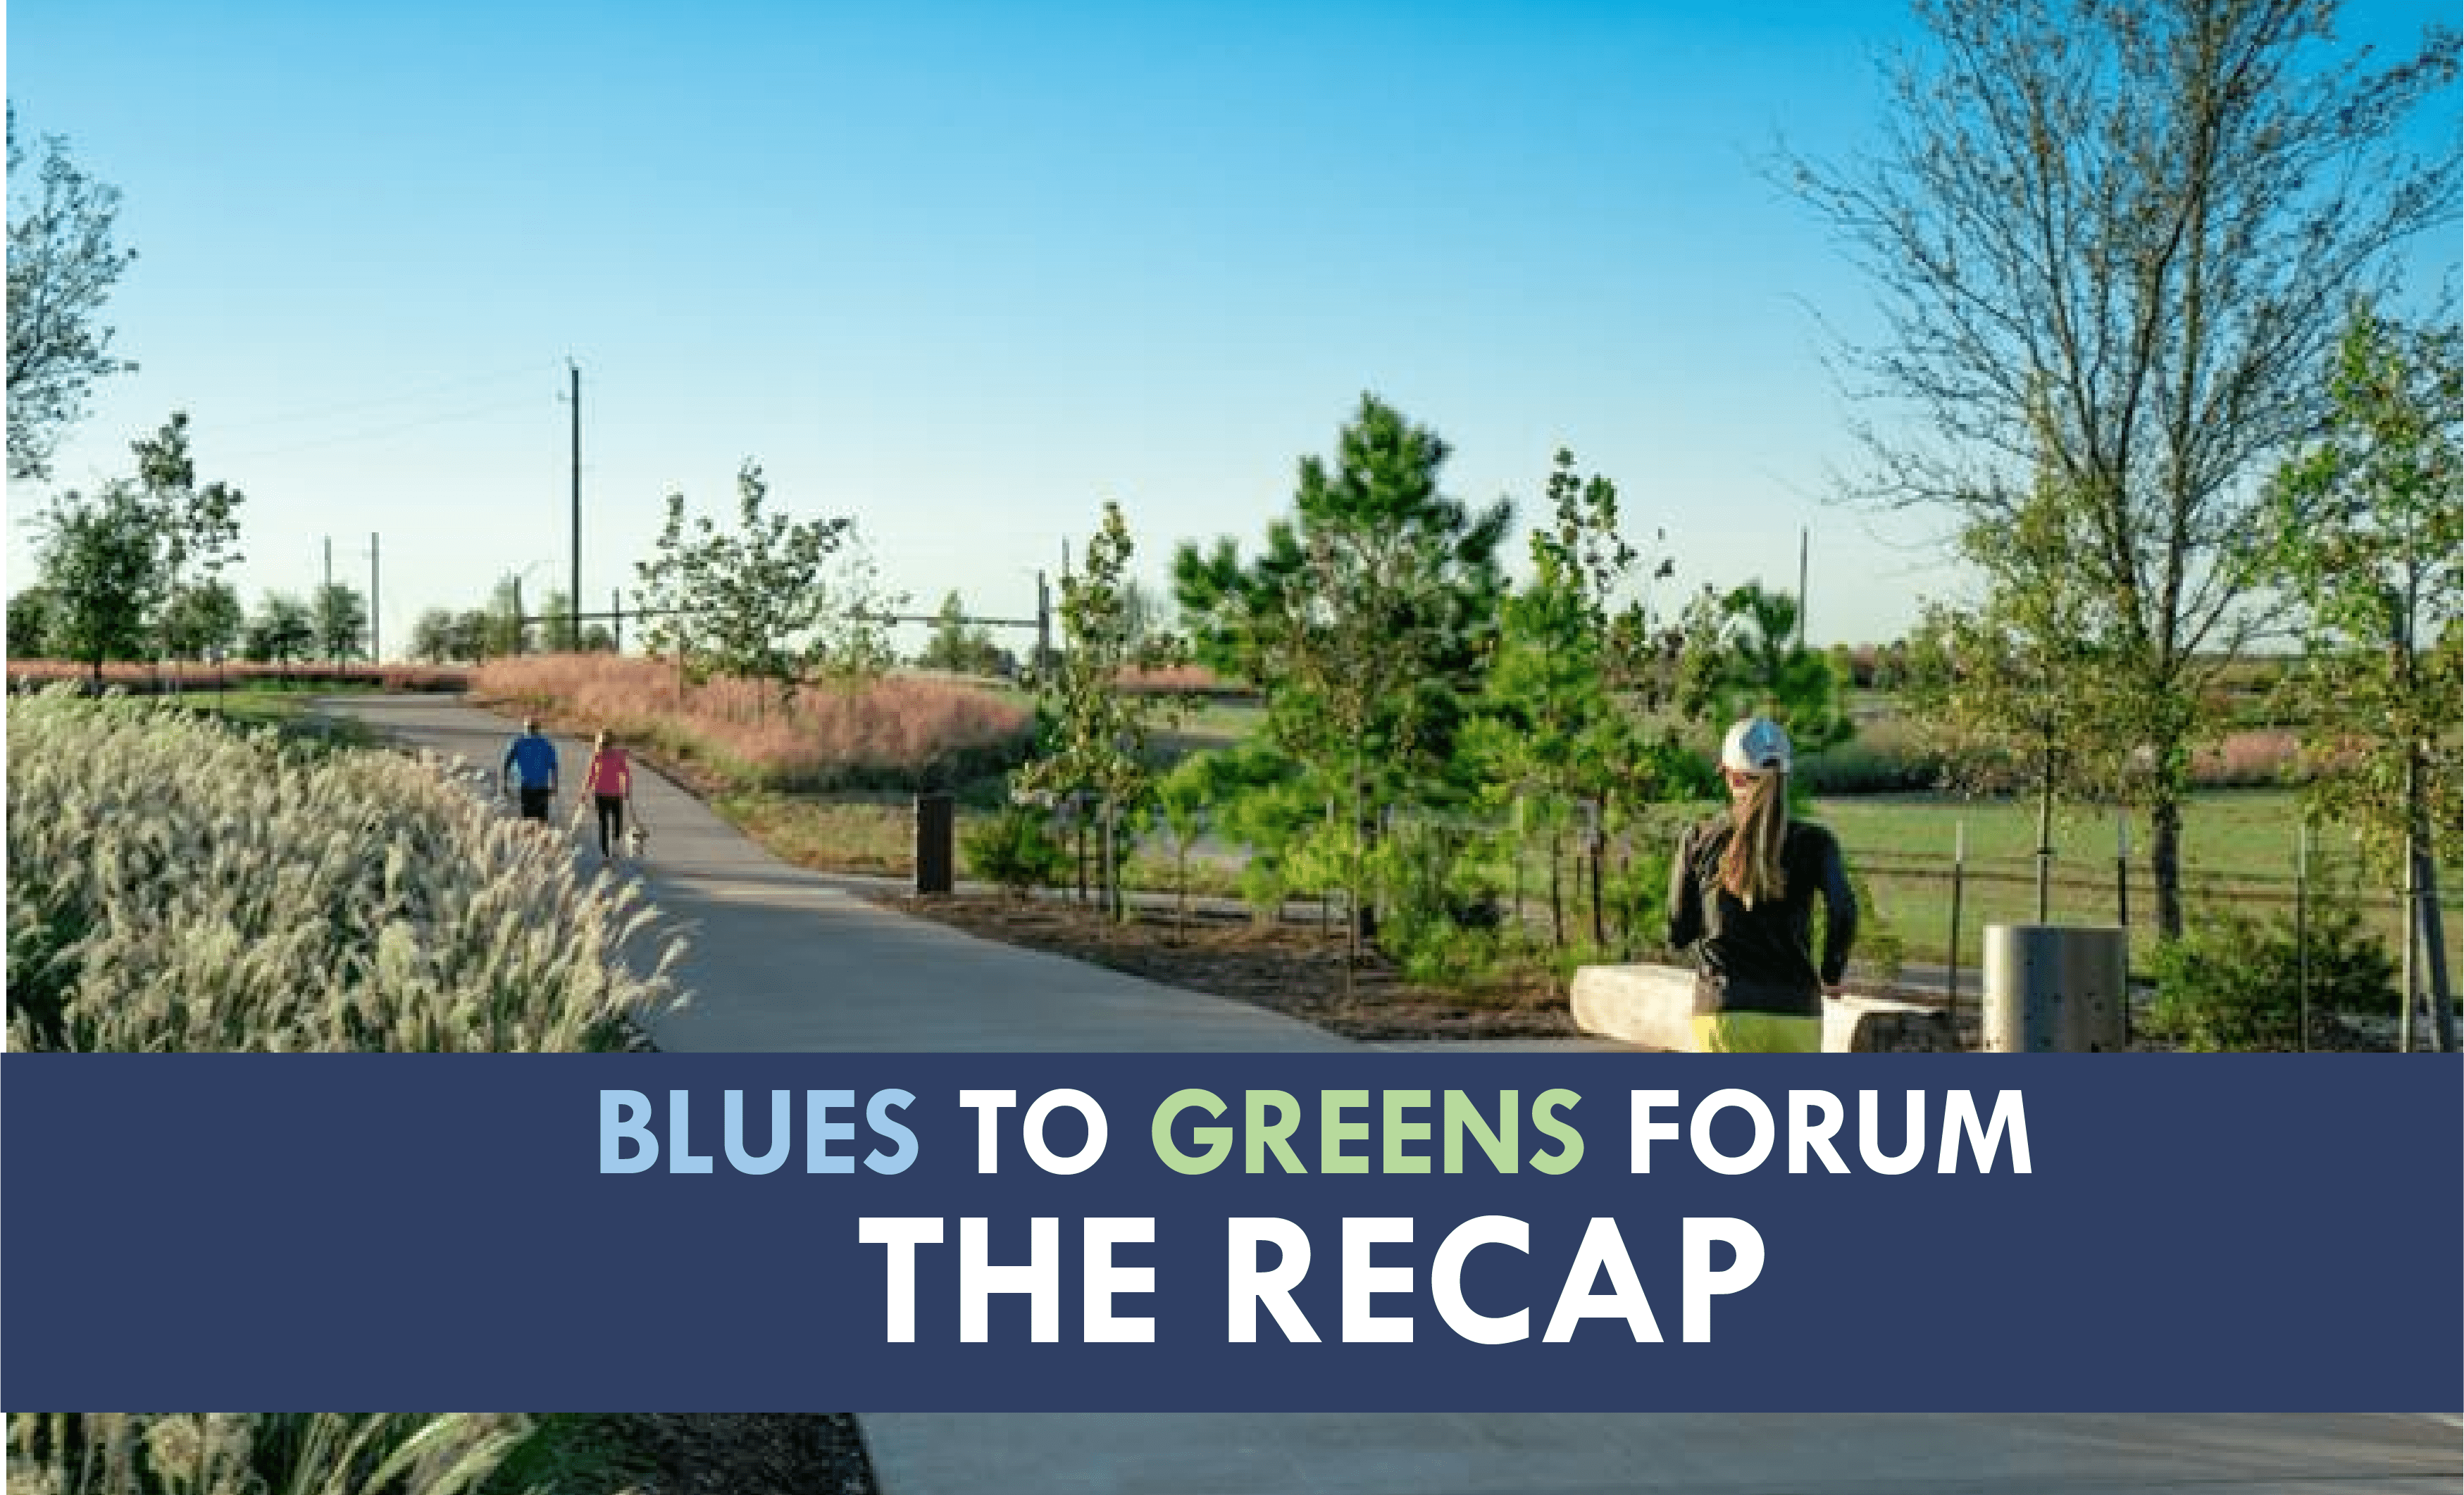 The Blues to Greens Forum Recap: Here’s What You Missed